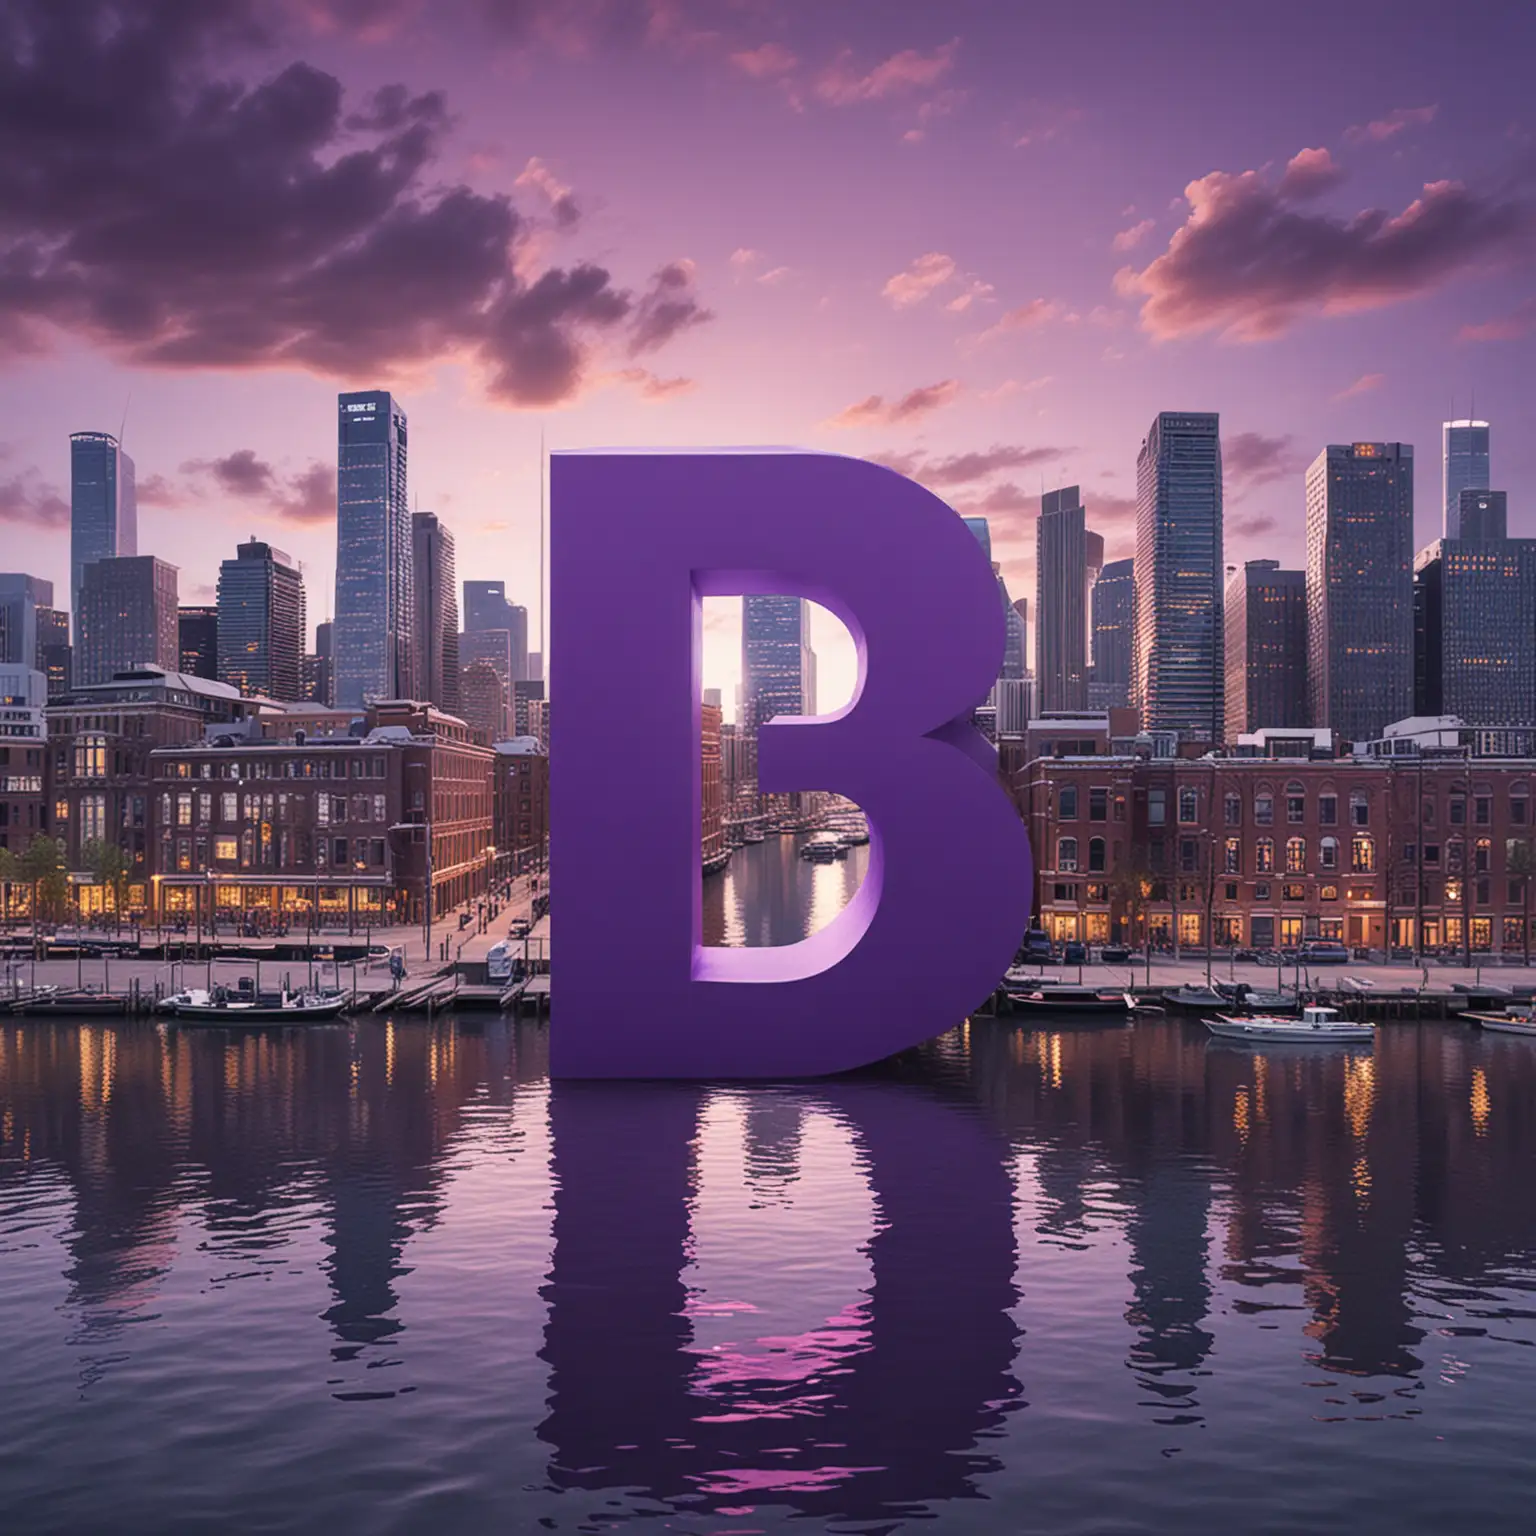 Create the letter "B" as a huge purple building complex, towering over other buildings, standing on a waterfront view city